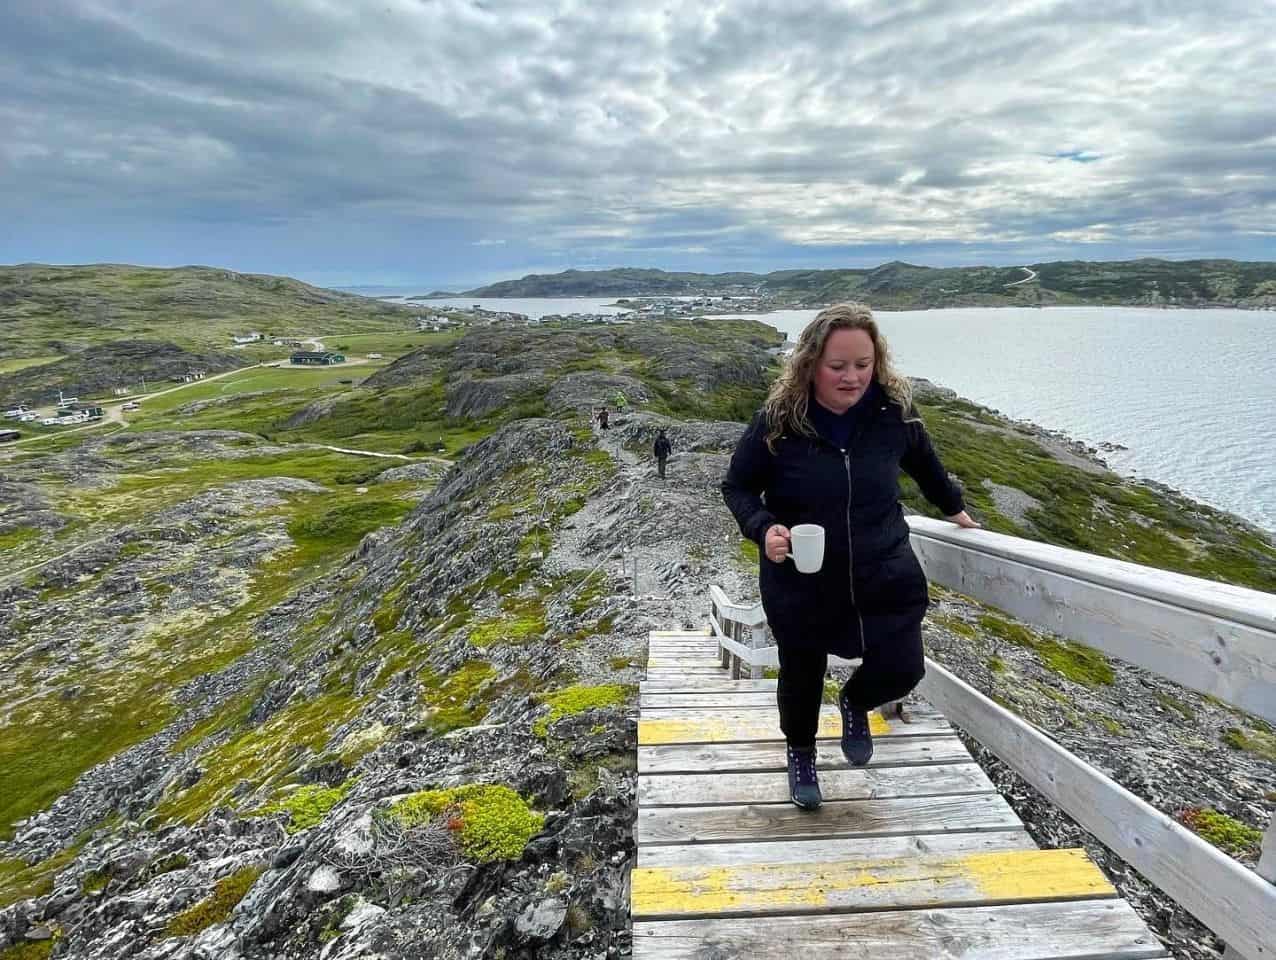 In Newfoundland Canada you can hike to the top of Brimstone Head to see the Flat Earth attraction.